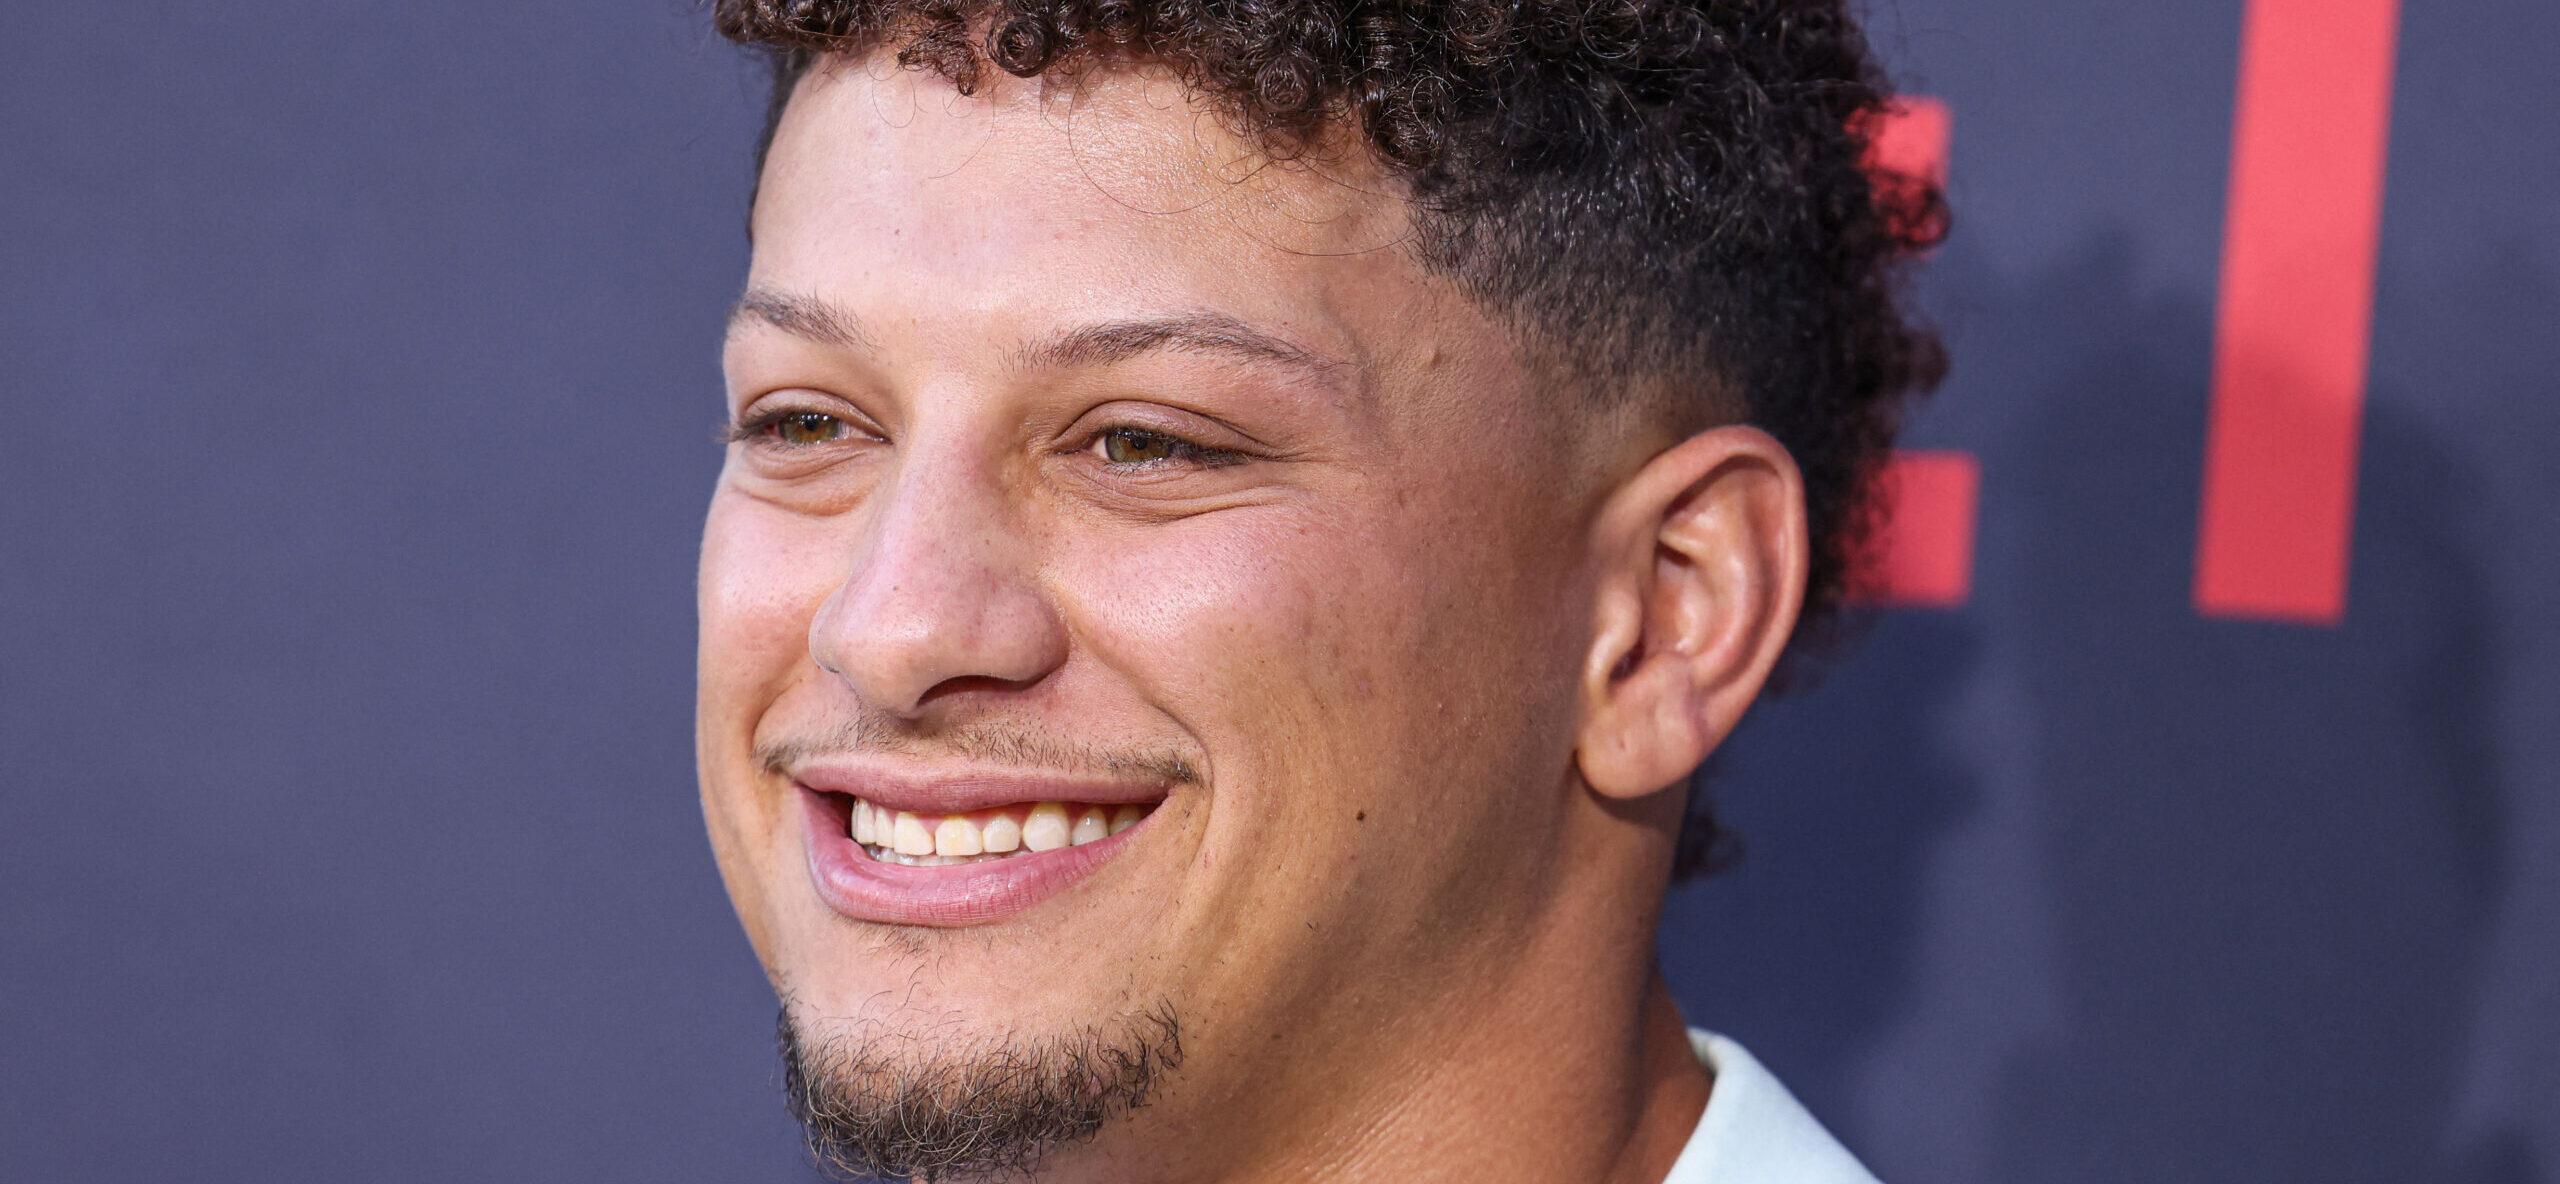 Patrick Mahomes's Dirty Secret: Wears Same Pair Of Underwear In Every NFL Game